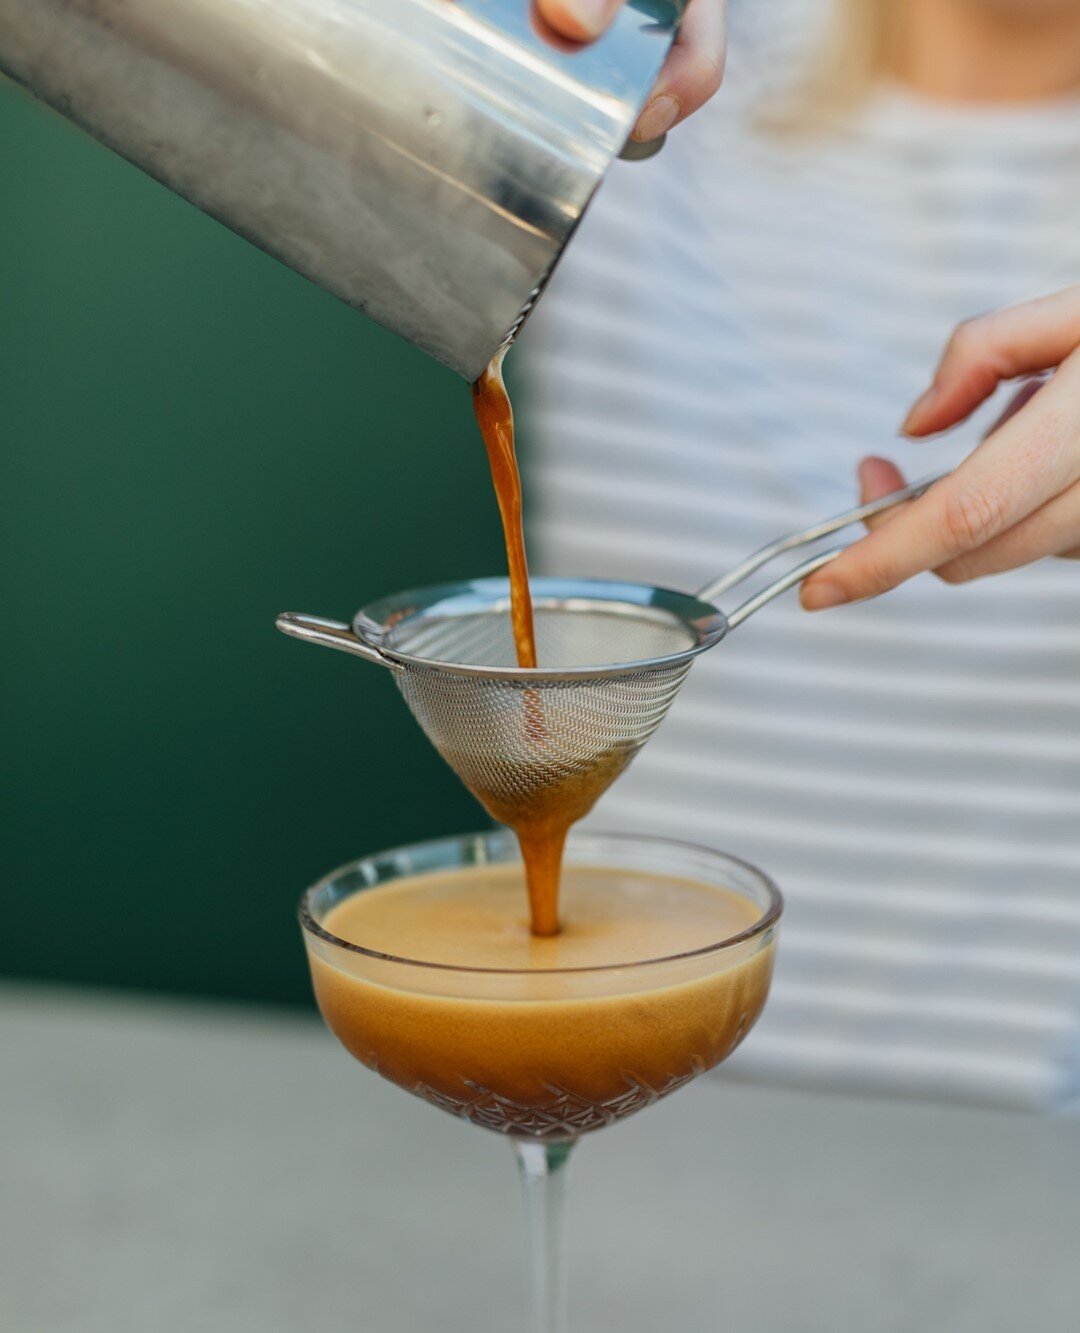 We'll have our Espresso in a Martini thanks! 😉⁠
Happy International Coffee Day to all the Coffee lovers out there ☕⁠
⁠
⁠
⁠
#shortyhotel #newcastle #newcastlensw #newcastlepub #pubfood #restaurant #bar #foodie #pubgrubhub #newcastlebloggers #newybite